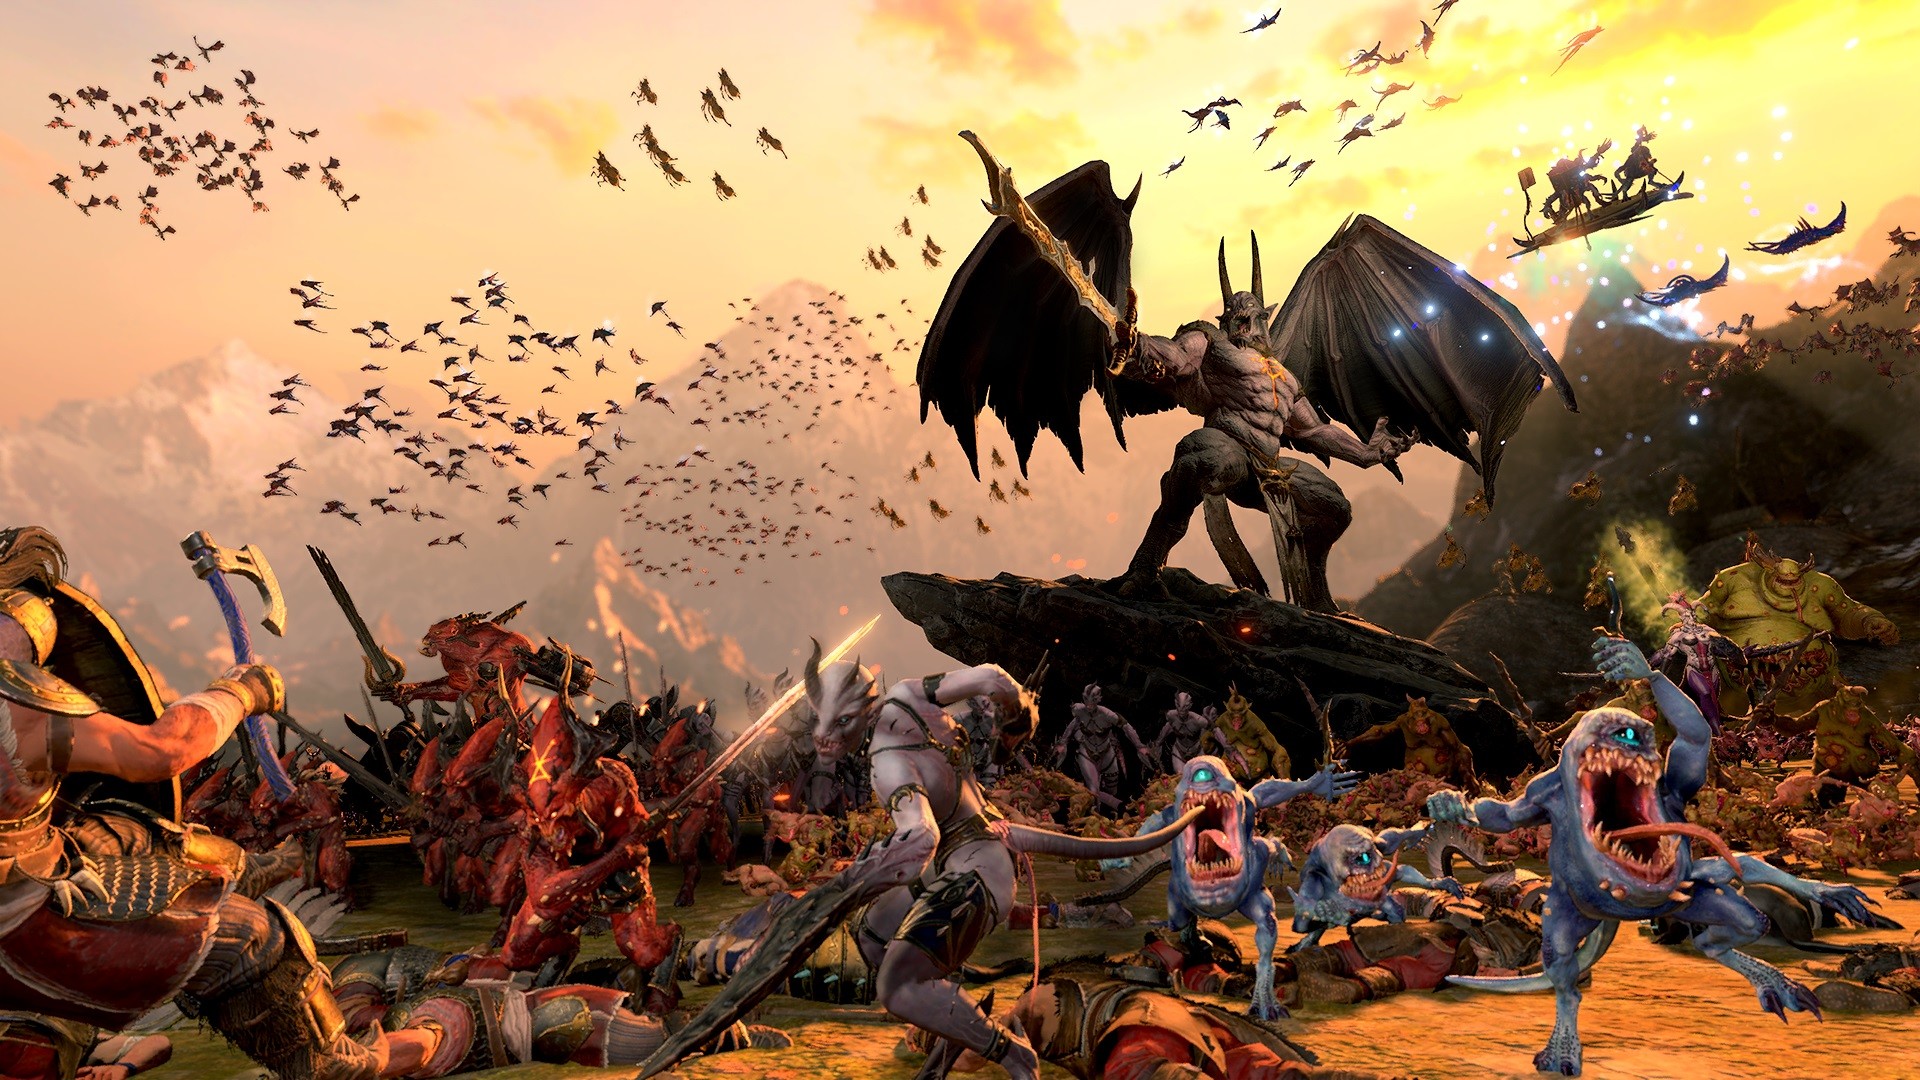  Total War: Warhammer 3 player numbers went up tenfold after Immortal Empires released 